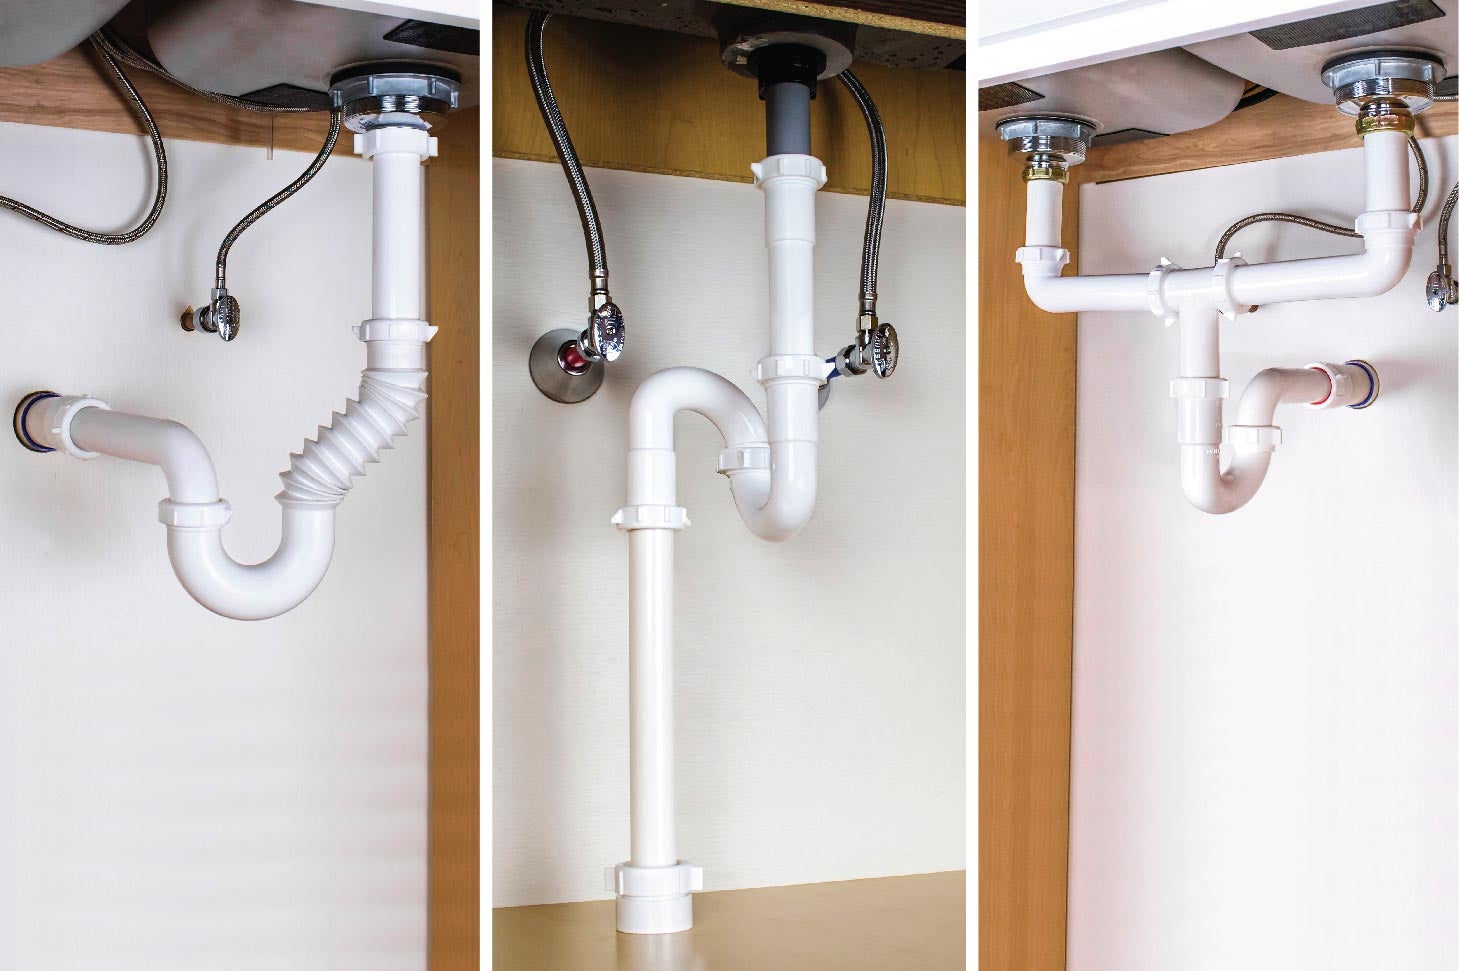 How to Install Bathroom Sink Plumbing: Set-up Your Own Bathroom ...